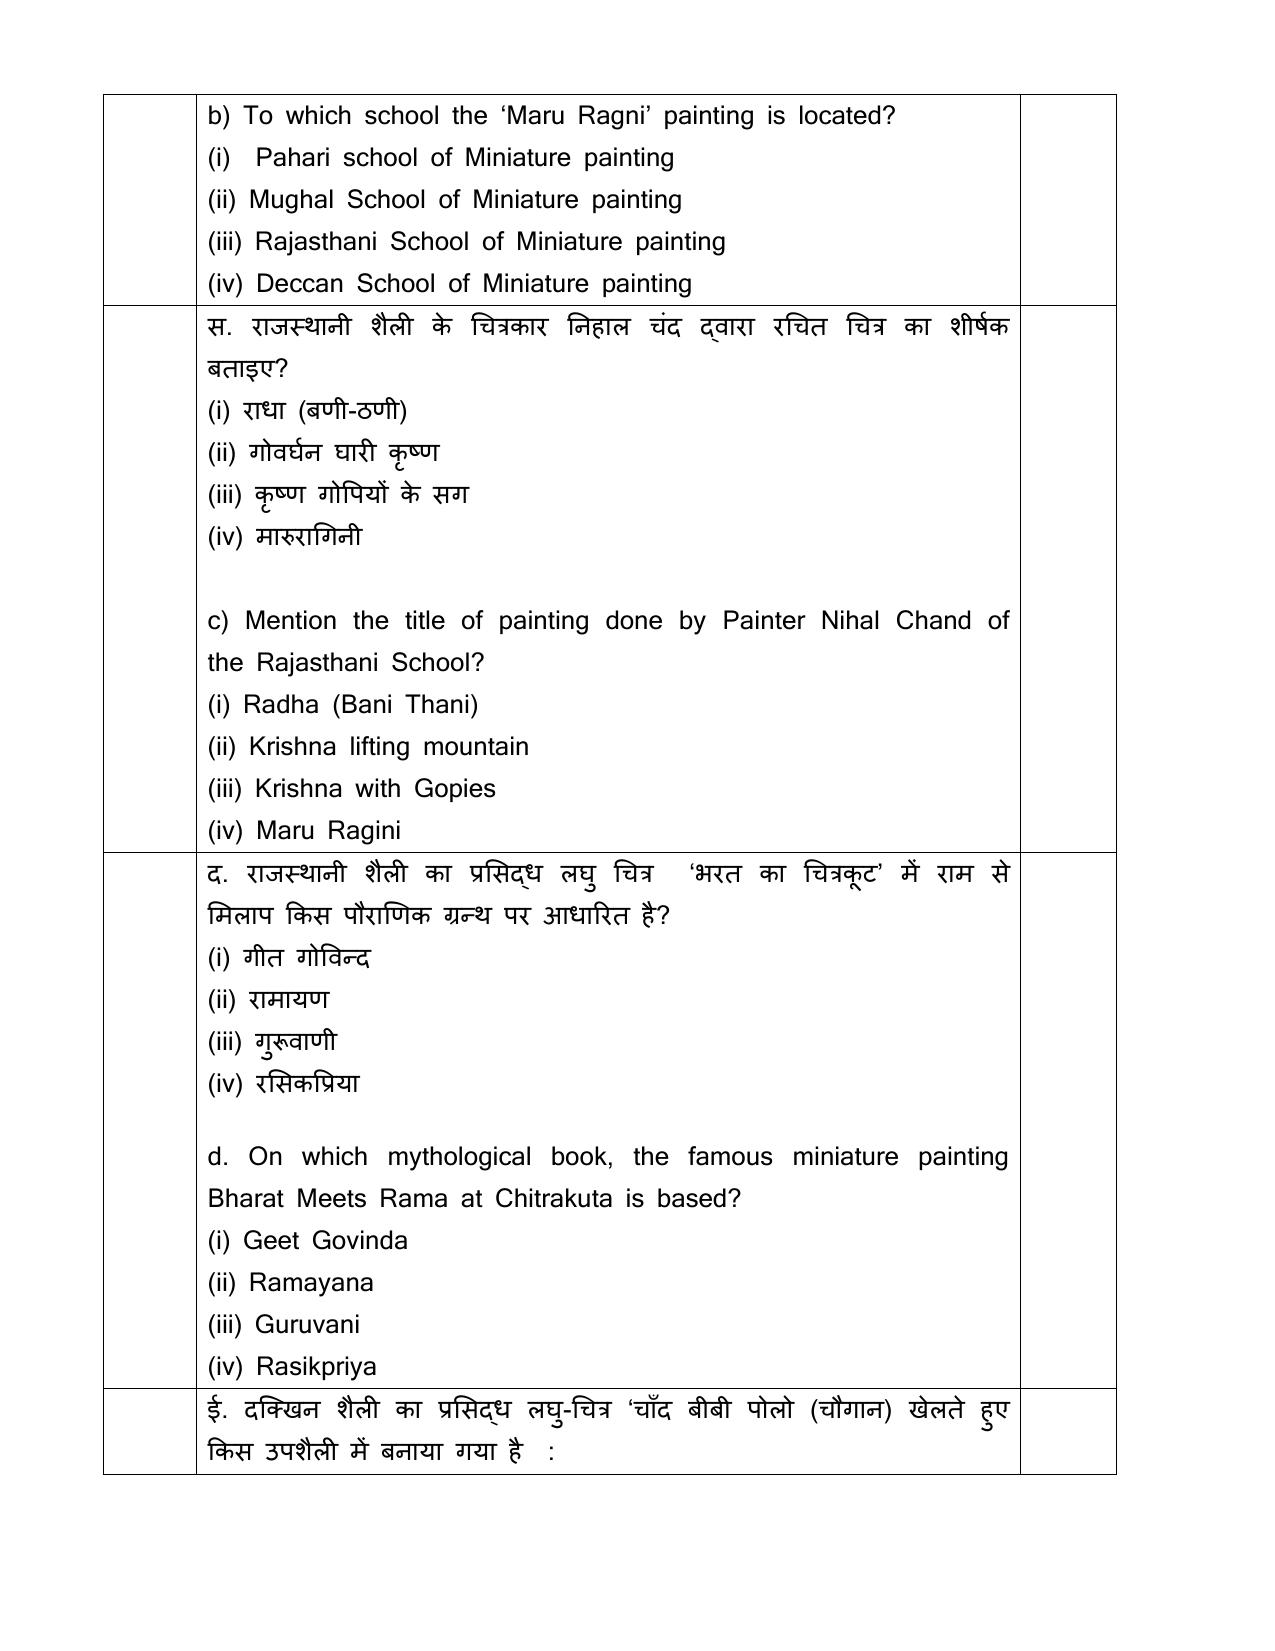 CBSE Class 12 Graphic -Sample Paper 2019-20 - Page 2